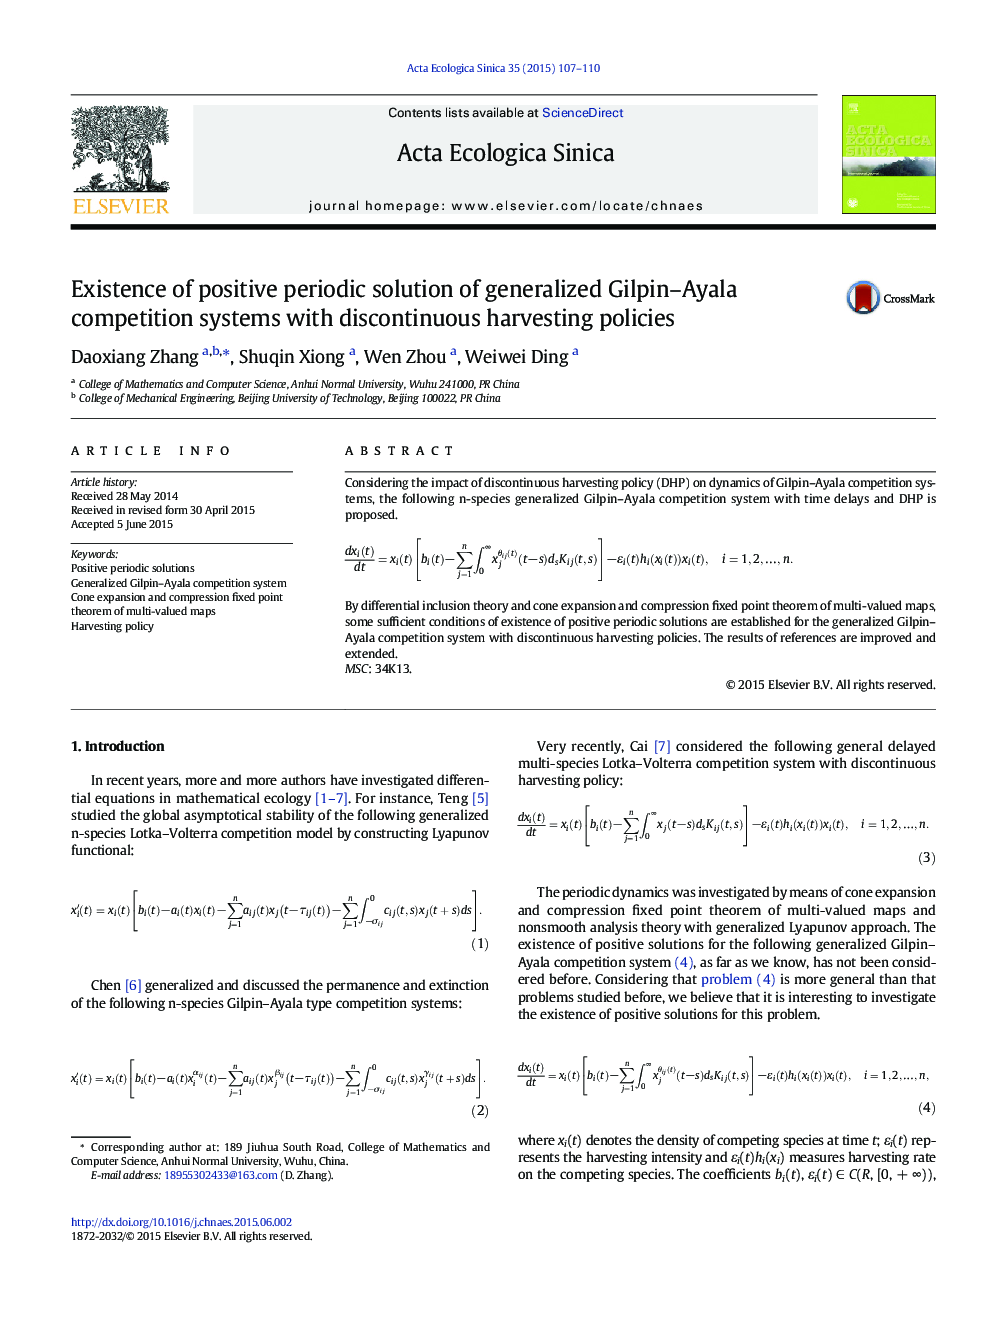 Existence of positive periodic solution of generalized Gilpin–Ayala competition systems with discontinuous harvesting policies